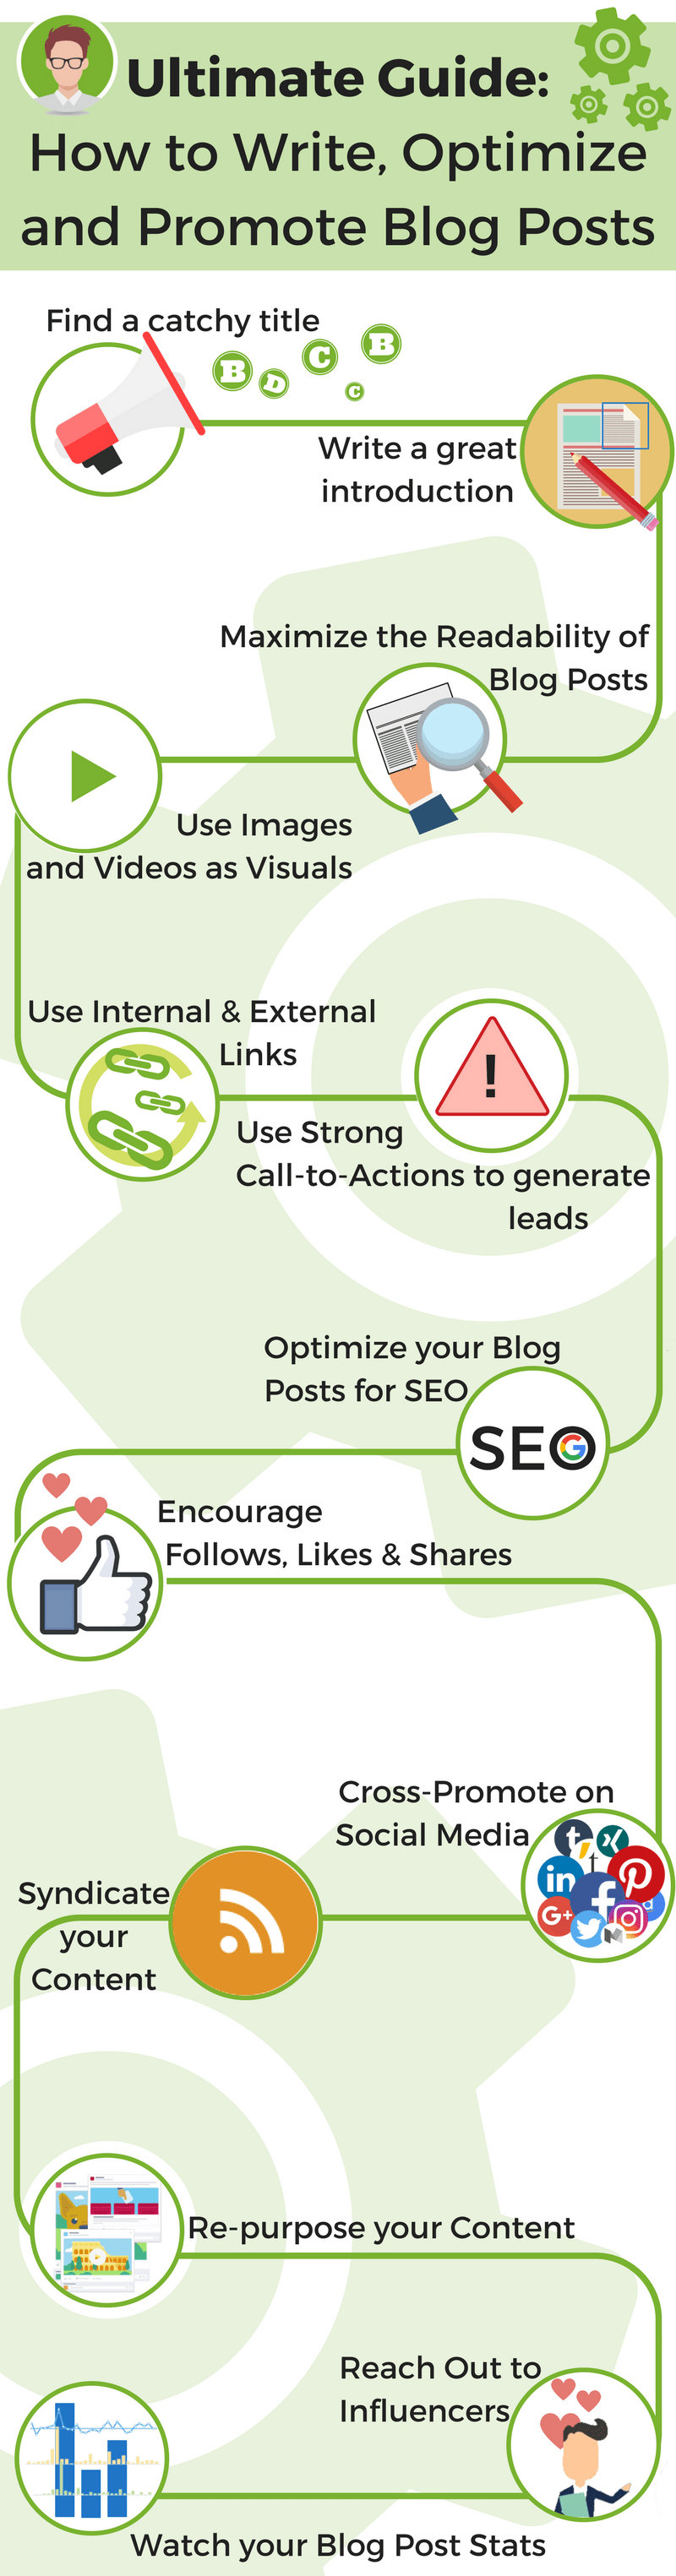 Ultimate_Guide_for_Bloggers_Infographic